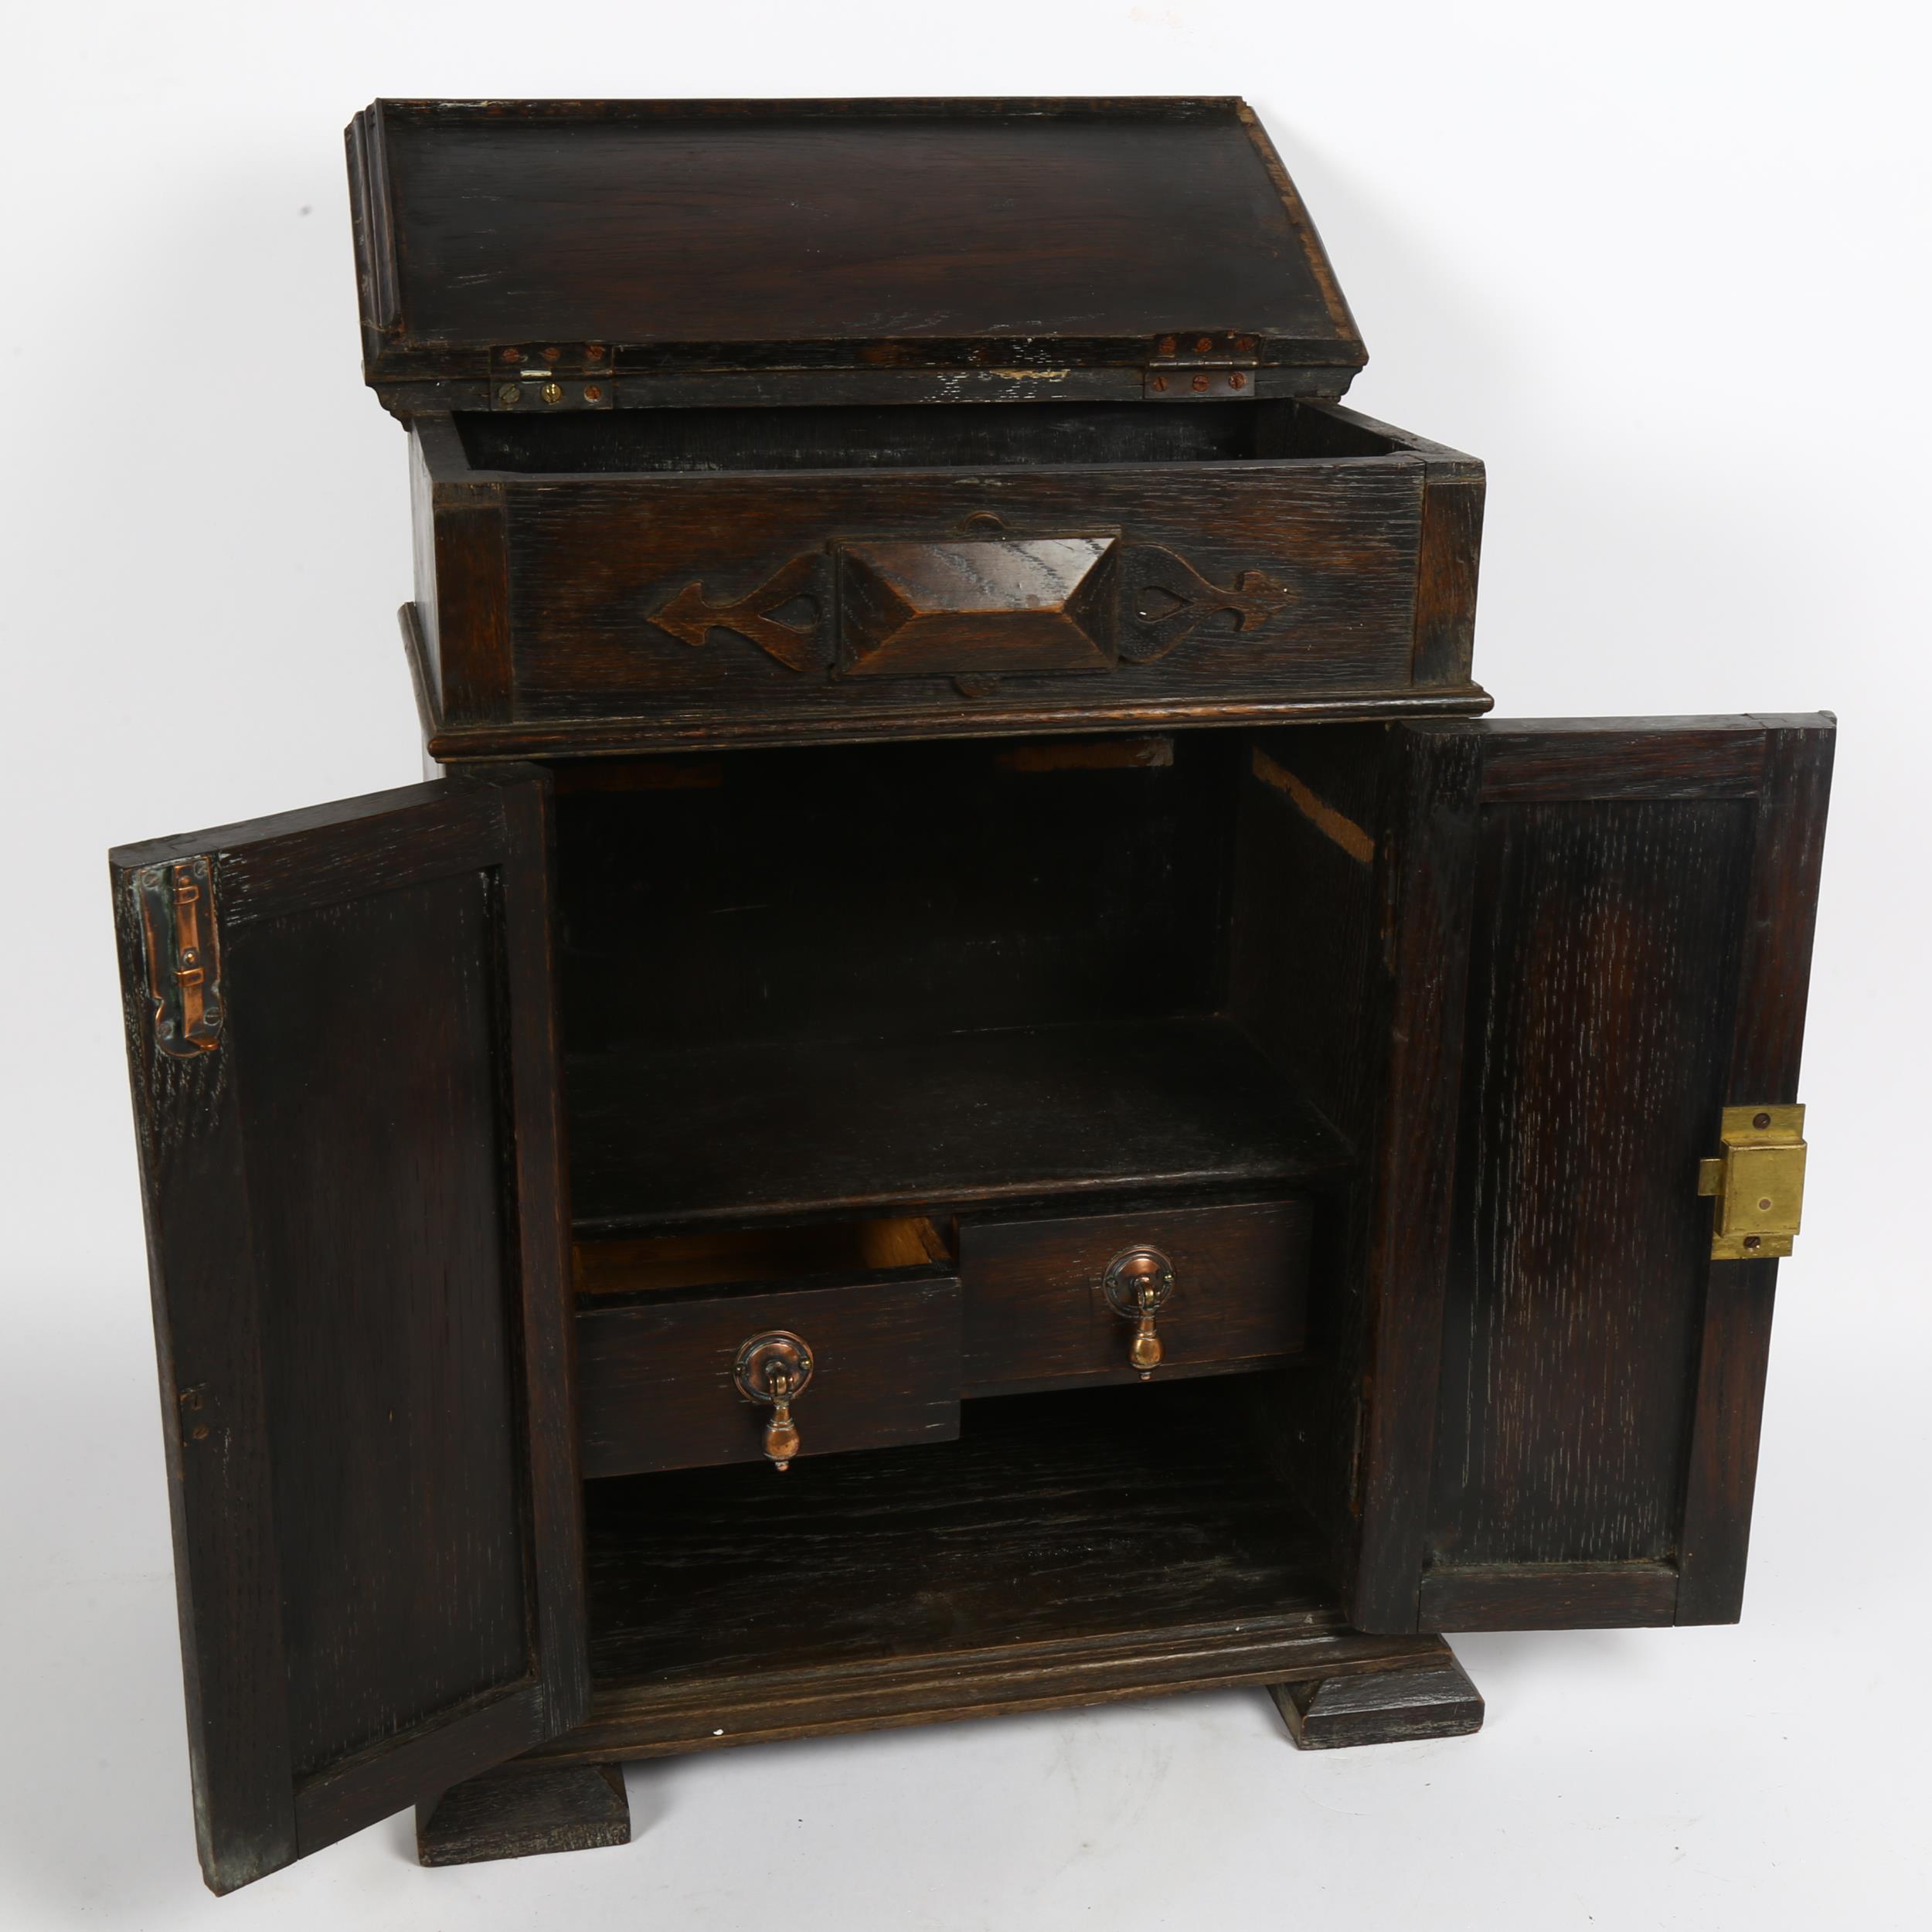 A 17th century style oak table-top armoire apprentice piece, geometric moulded doors, with - Image 2 of 2